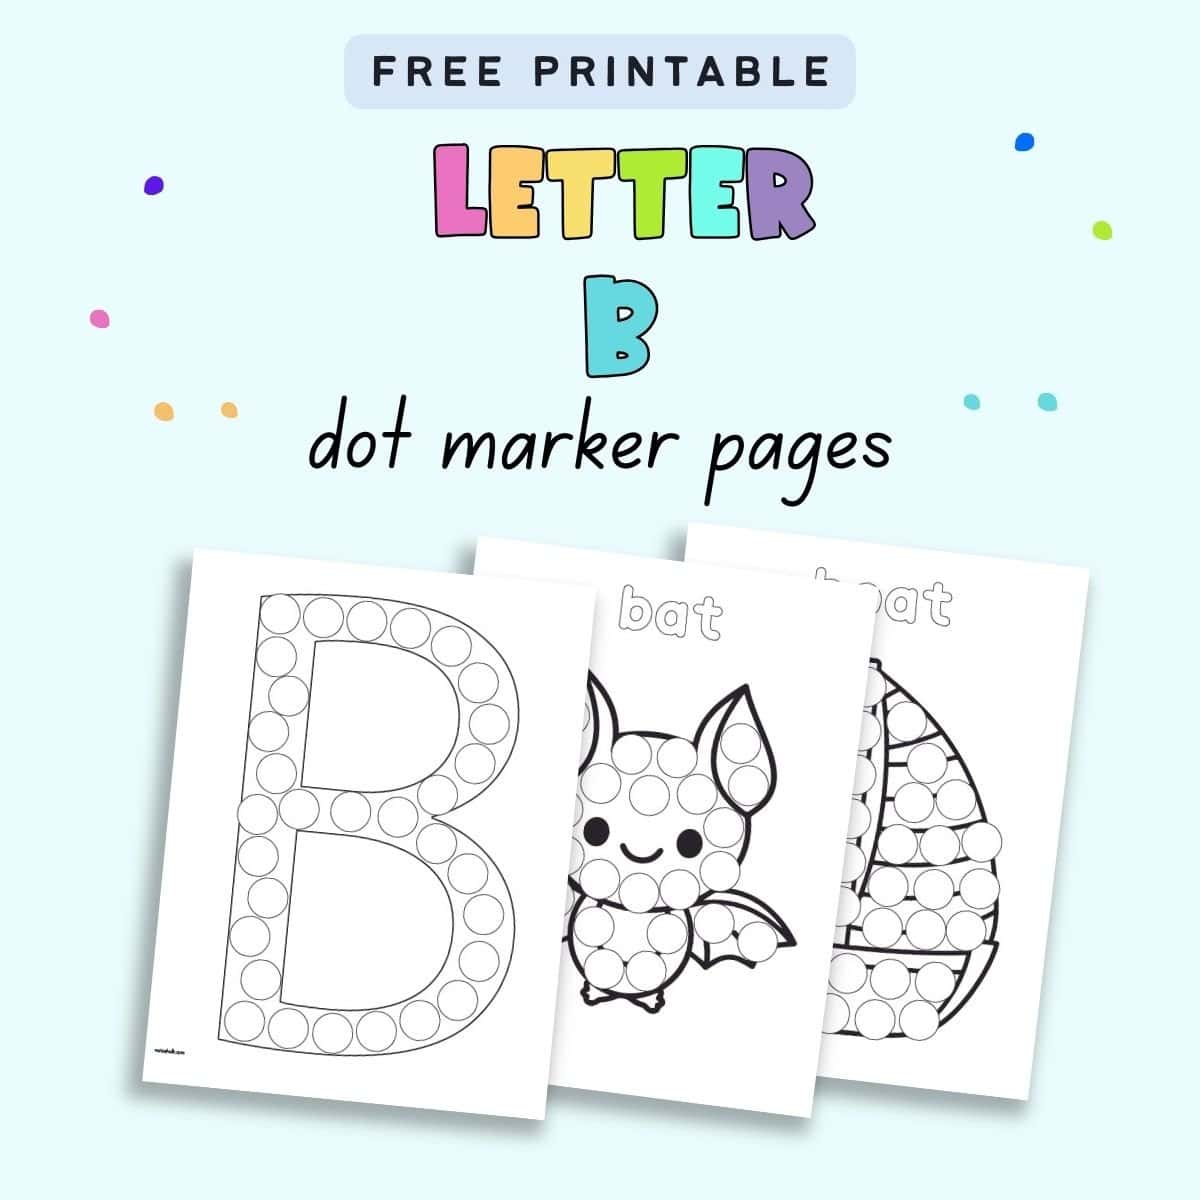 Text "Are printable letter b dot marker pages" with a preview of three dot marker pages showing an uppercase B, a bat, and a boat